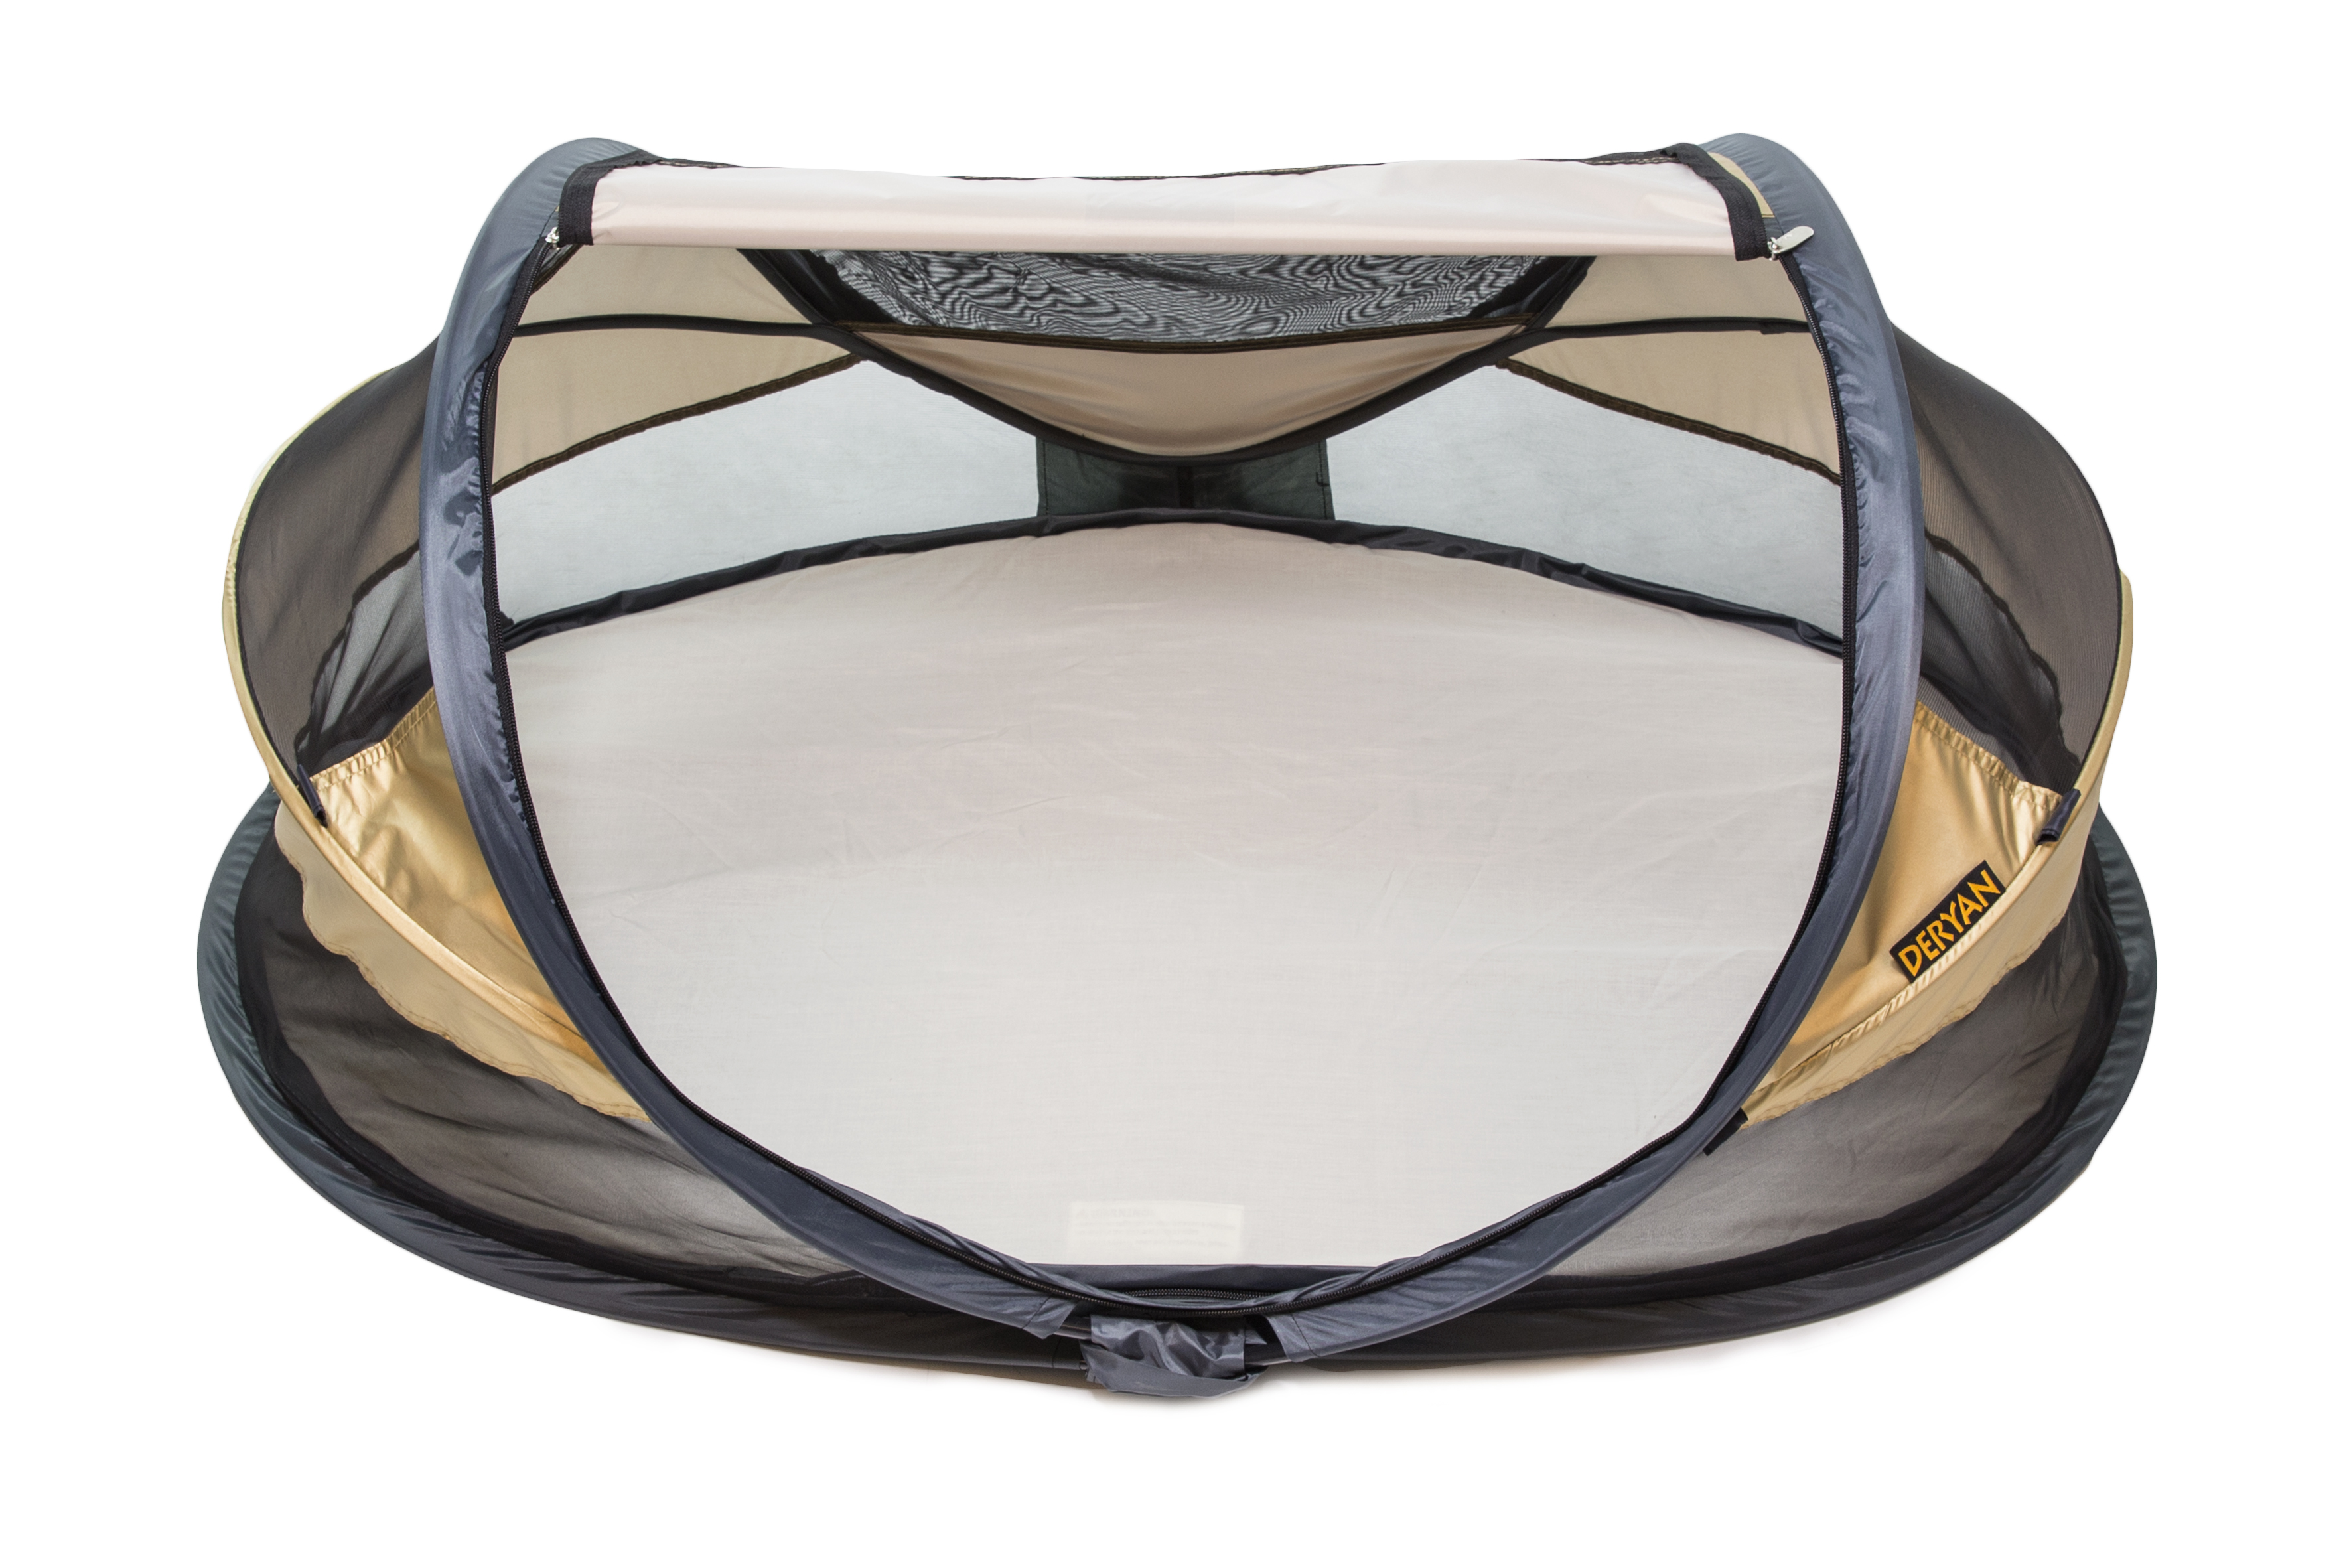 Deryan Travel Cot Baby Luxe Gold Travel Cot Baby Luxe Gold gold